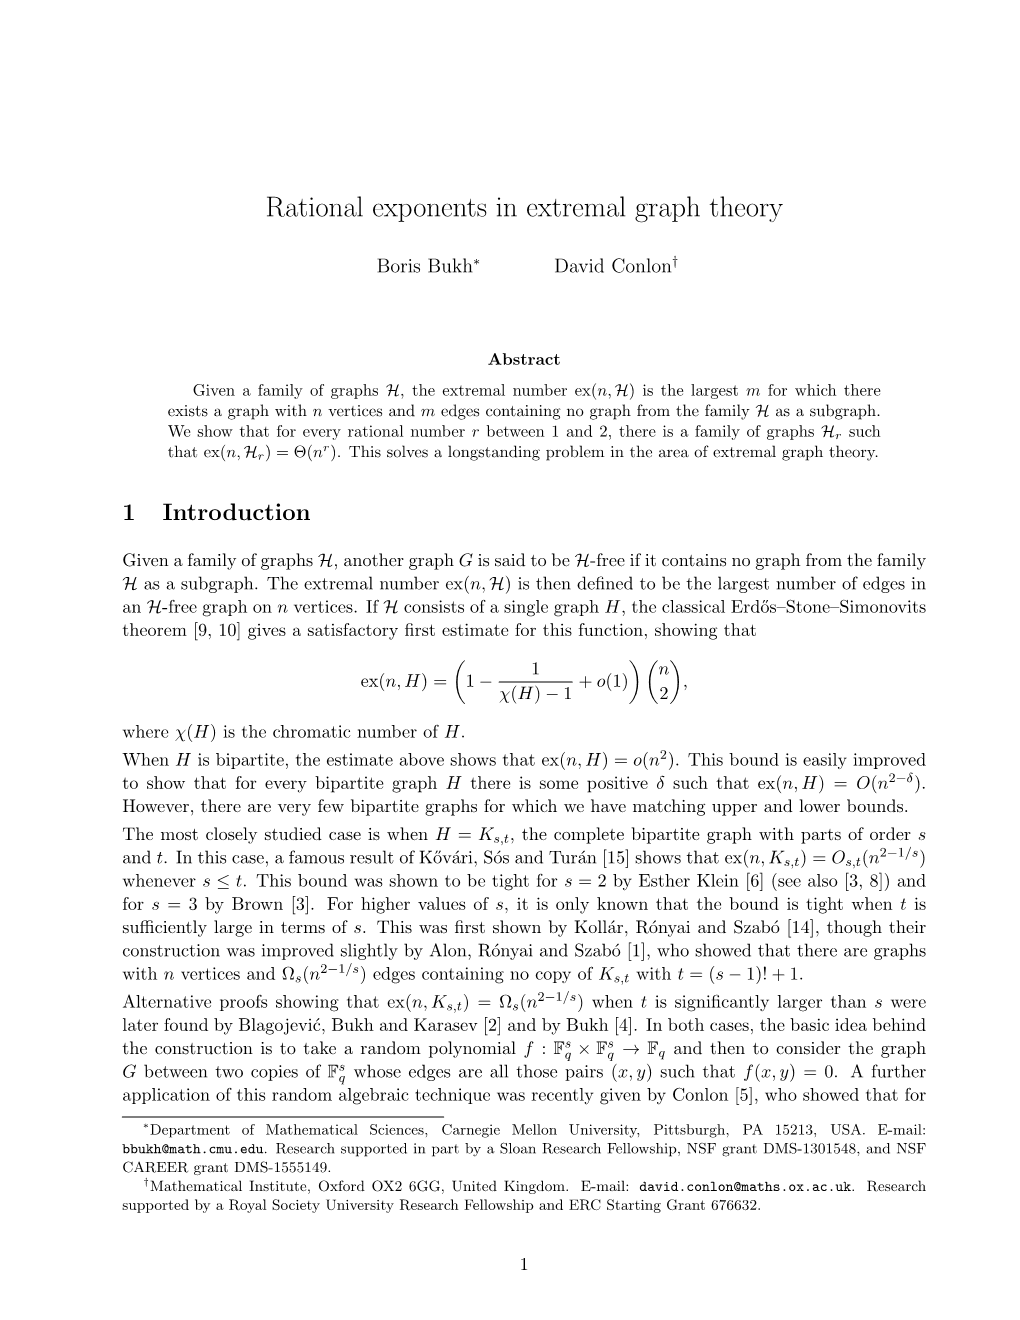 Rational Exponents in Extremal Graph Theory